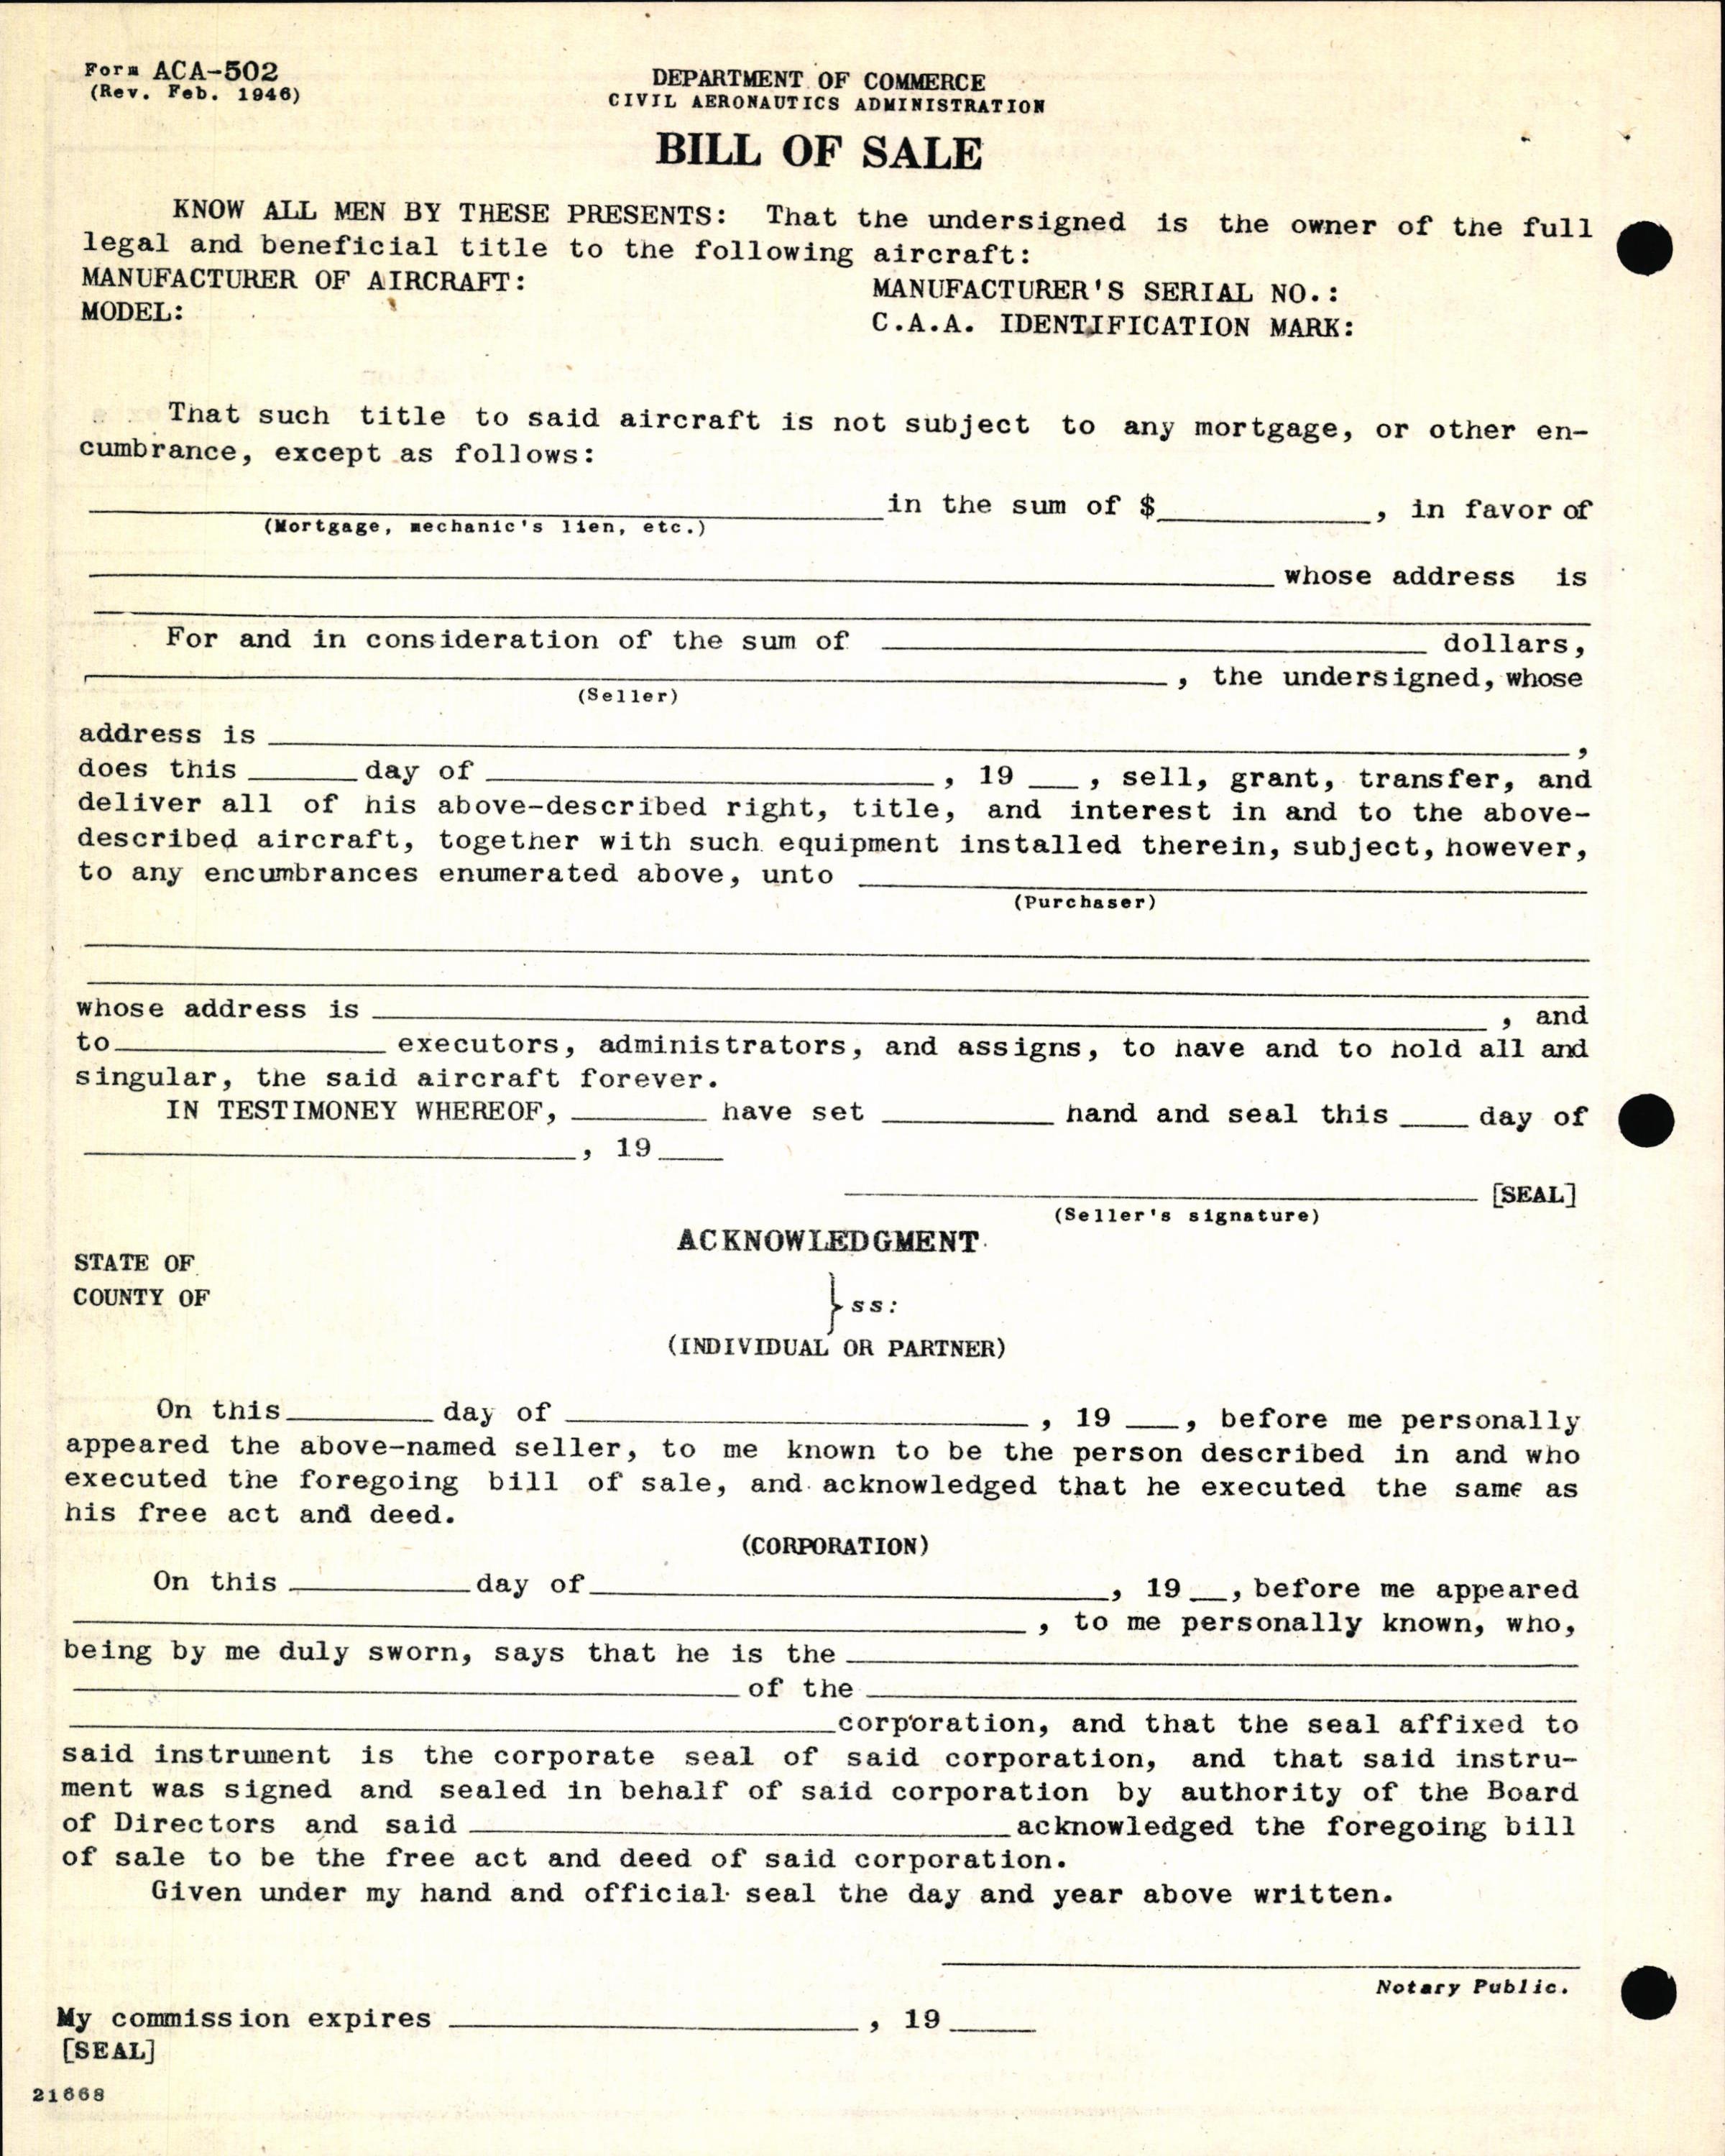 Sample page 6 from AirCorps Library document: Technical Information for Serial Number 1202